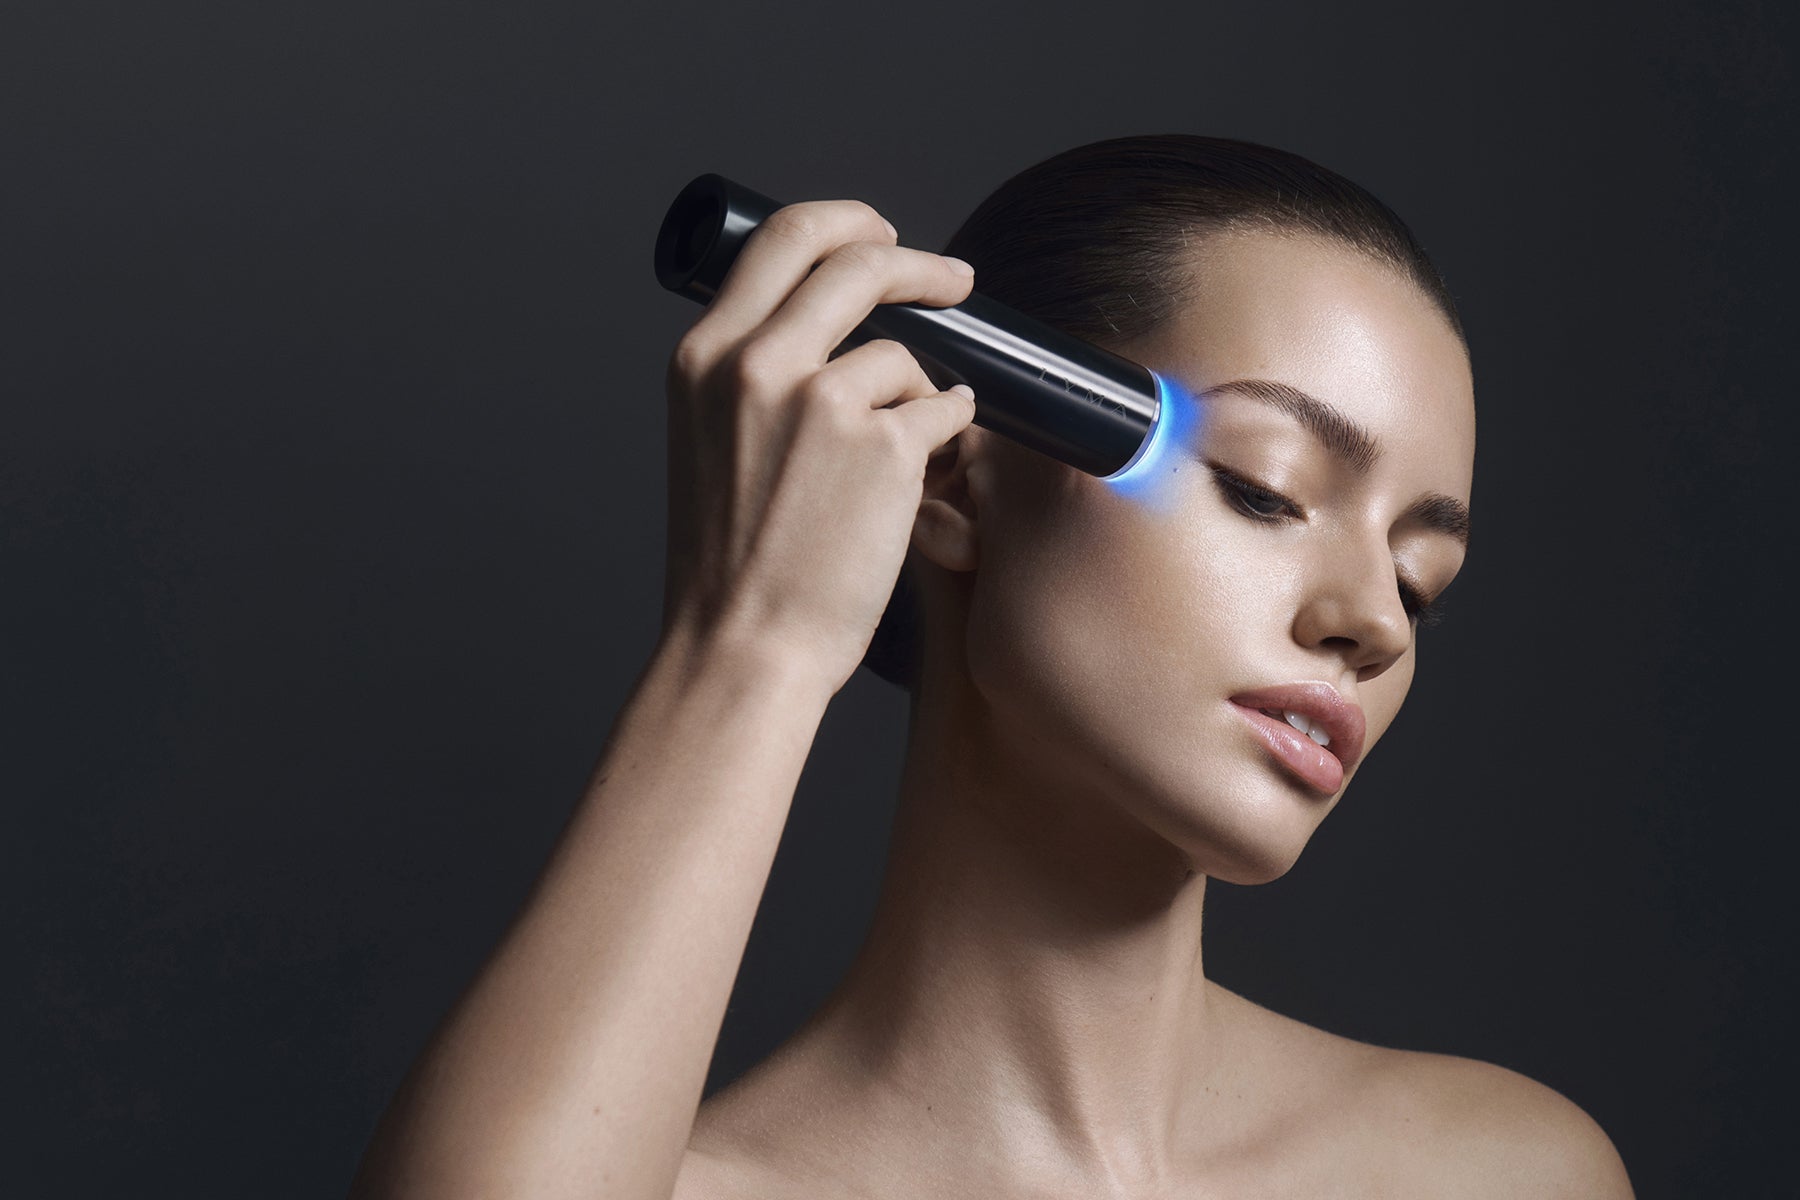 Time Control - Talika - Anti-Ageing Cosmetic Device based on Light Therapy  - Light Therapy and Ionotherapy Device 